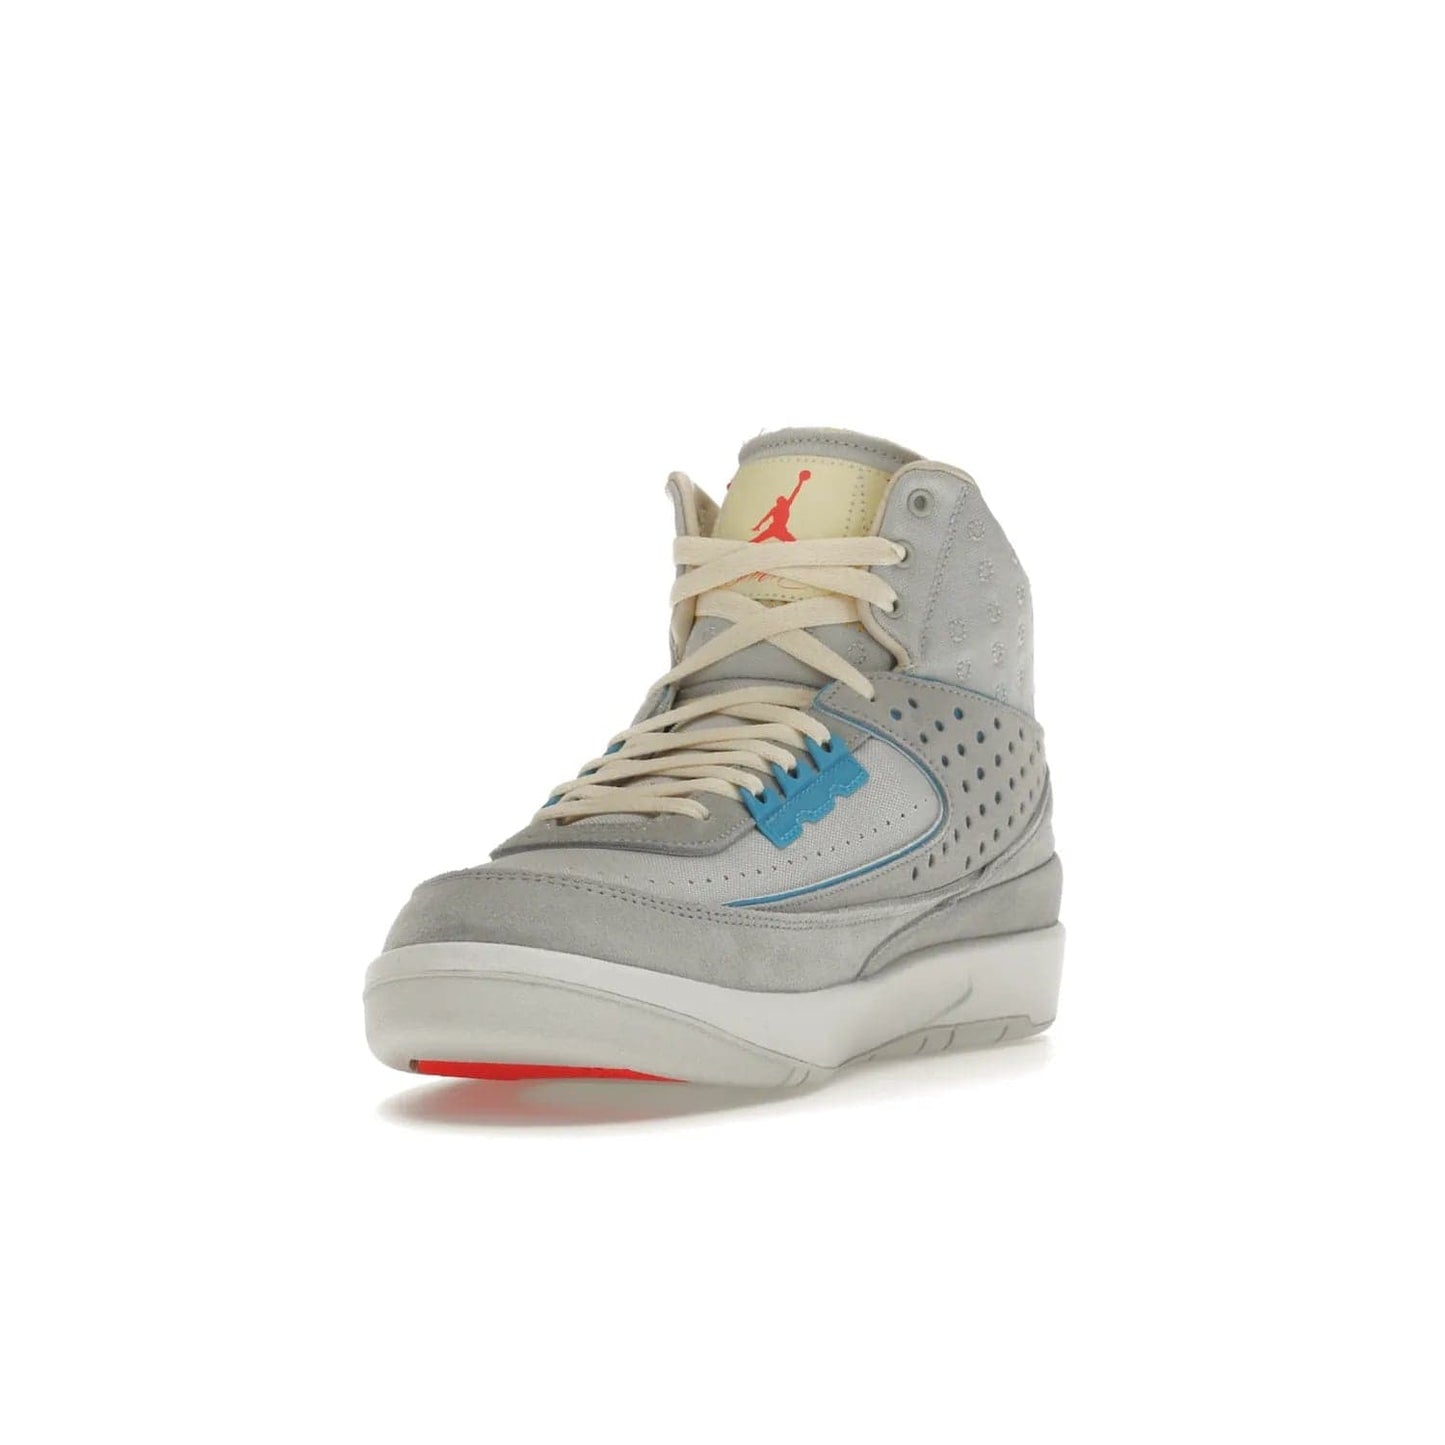 Jordan 2 Retro SP Union Grey Fog - Image 13 - Only at www.BallersClubKickz.com - Introducing the Air Jordan 2 Retro SP Union Grey Fog. This intricate sneaker design features a grey canvas upper with light blue eyelets, eyestay patches, and piping, plus custom external tags. Dropping in April 2022, this exclusive release offers a worn-in look and feel.